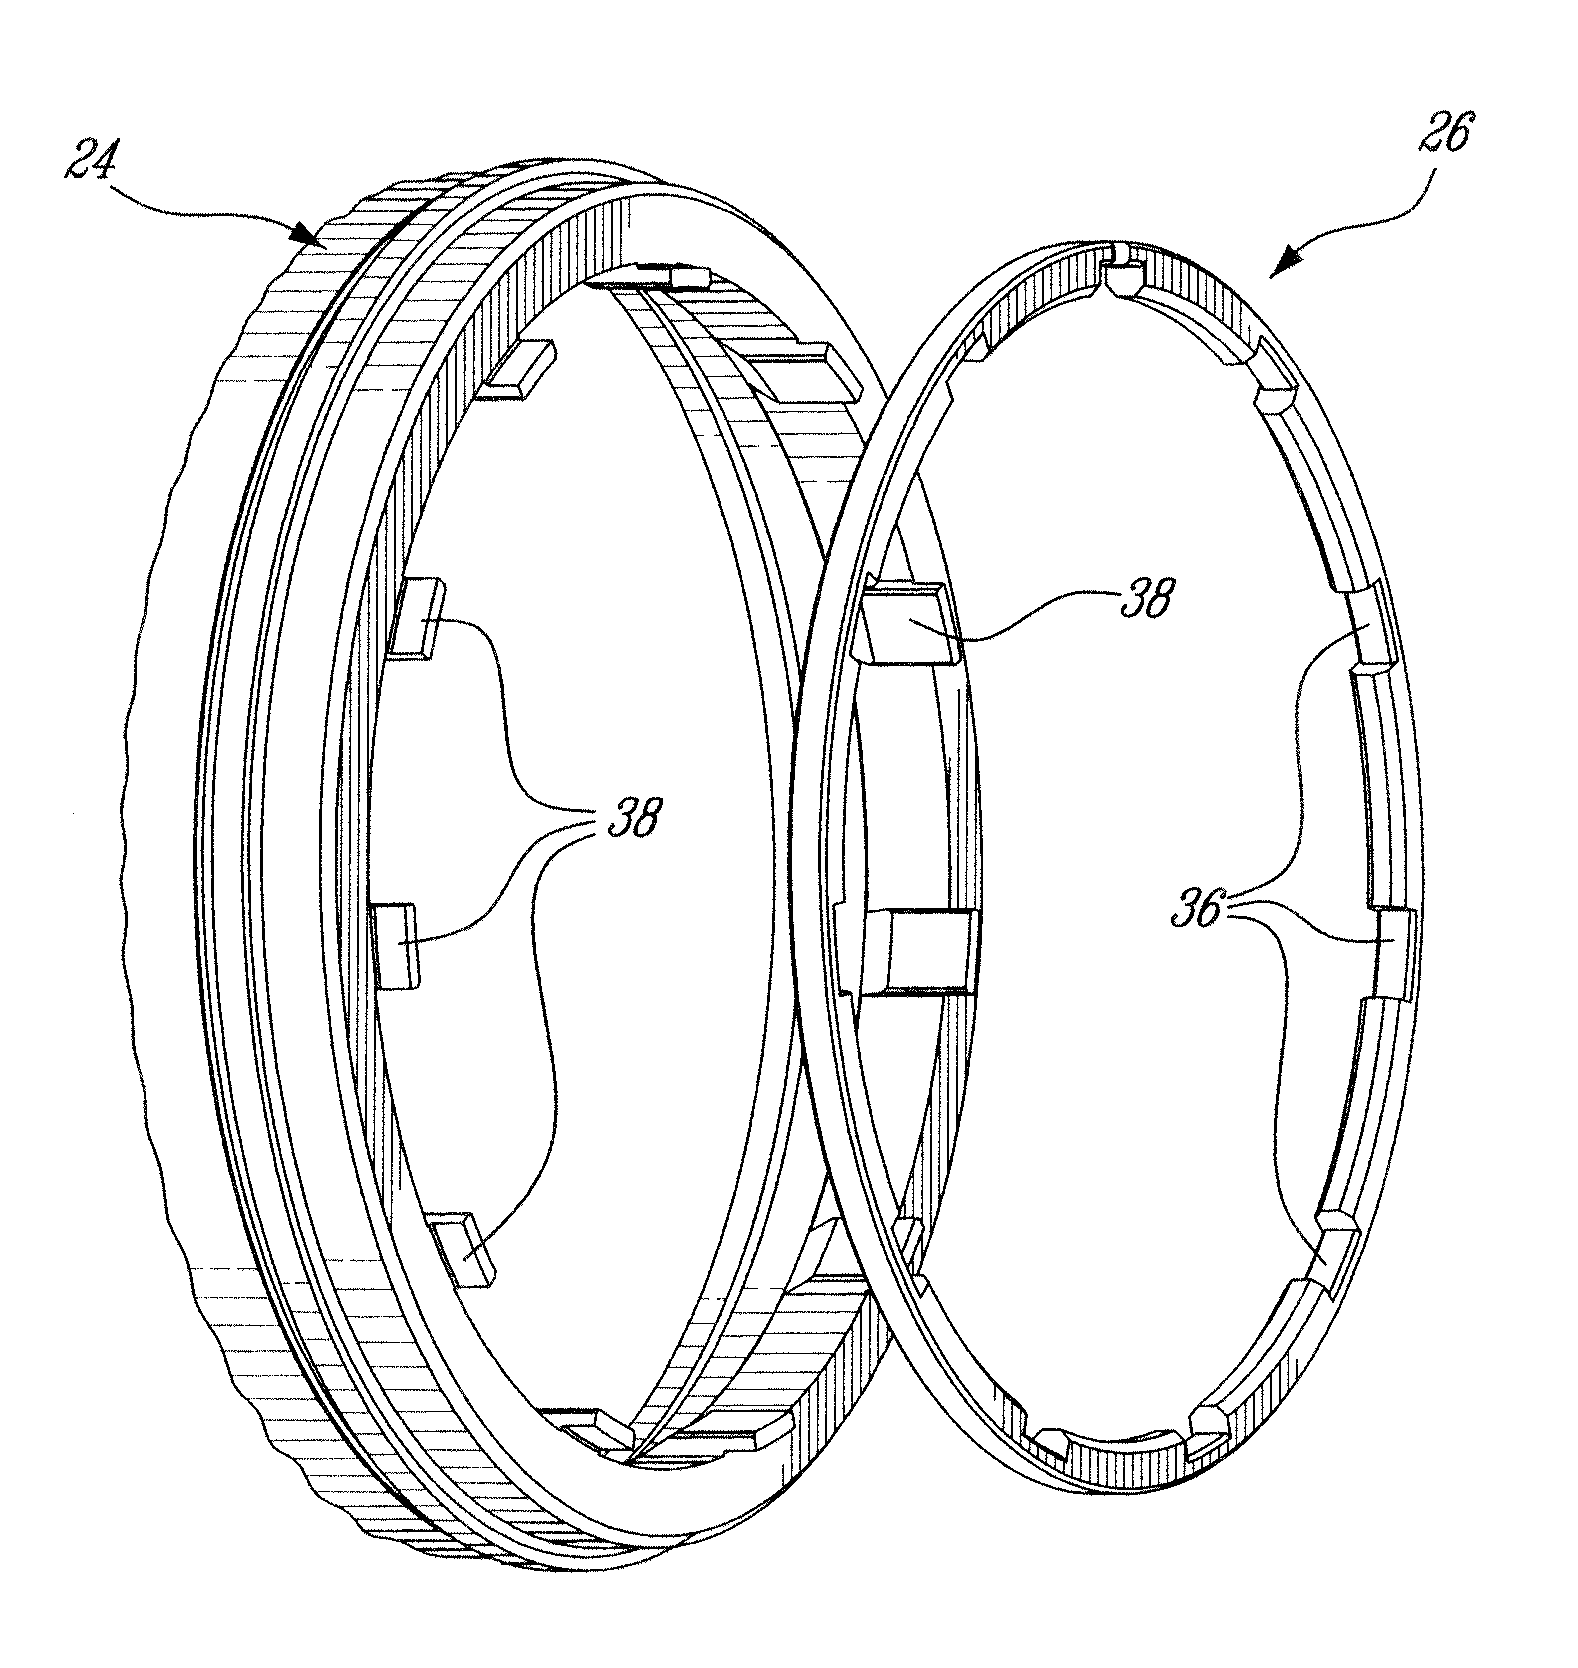 Retaining ring arrangement for a rotary assembly